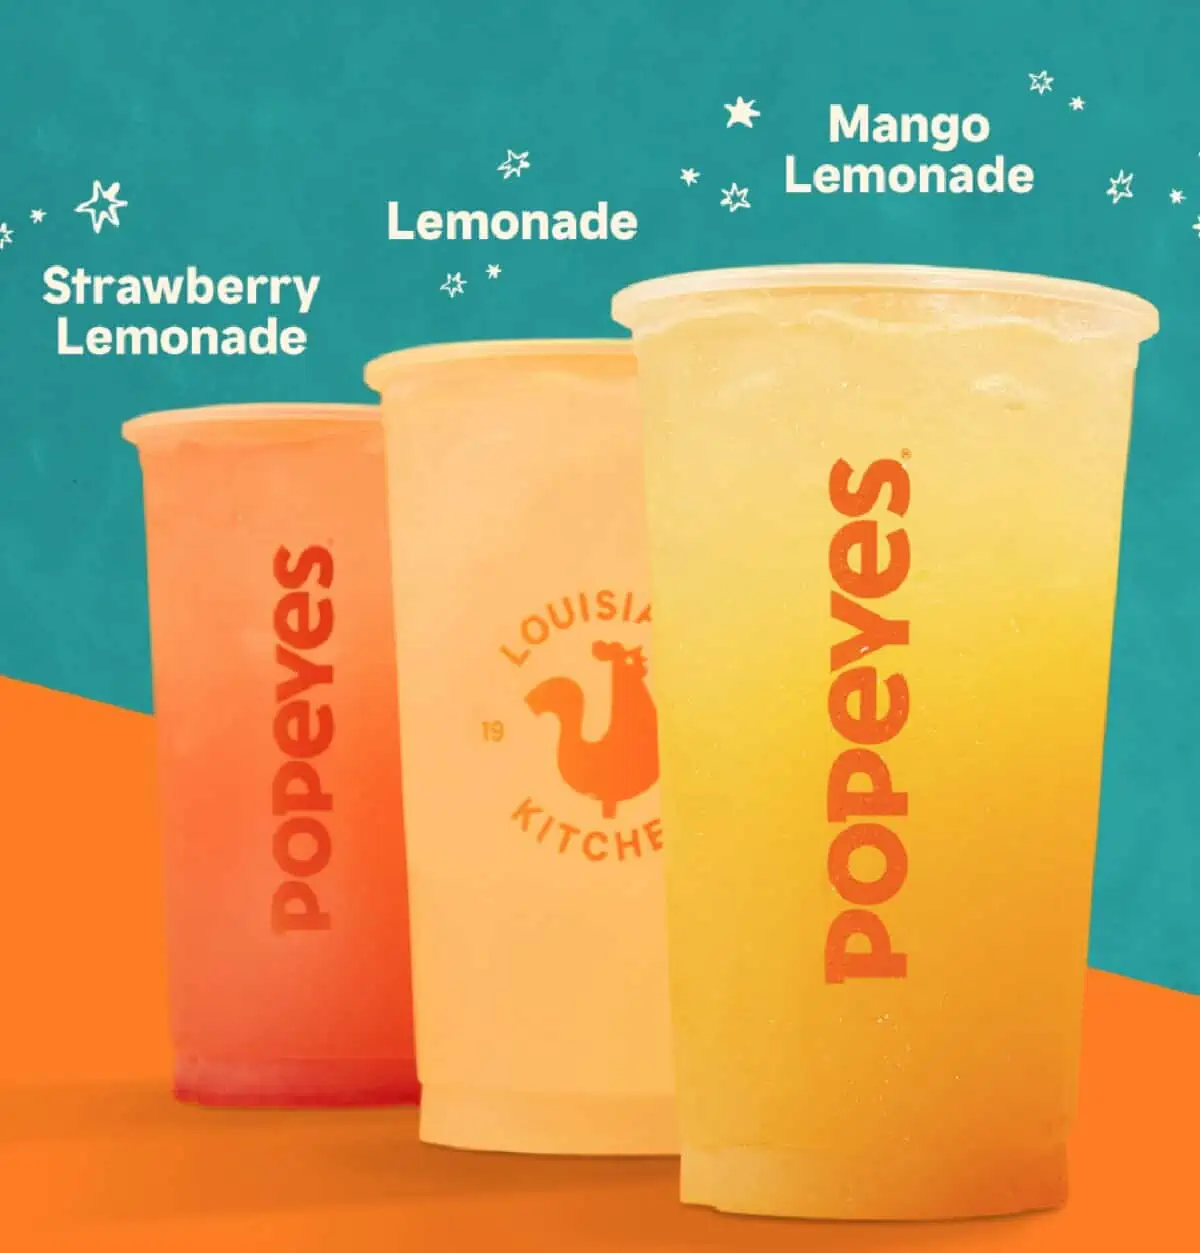 Three Popeyes lemonade flavors (Strawberry, Regular and Mango) lined up next to each other in clear plastic cups against a green and orange background.